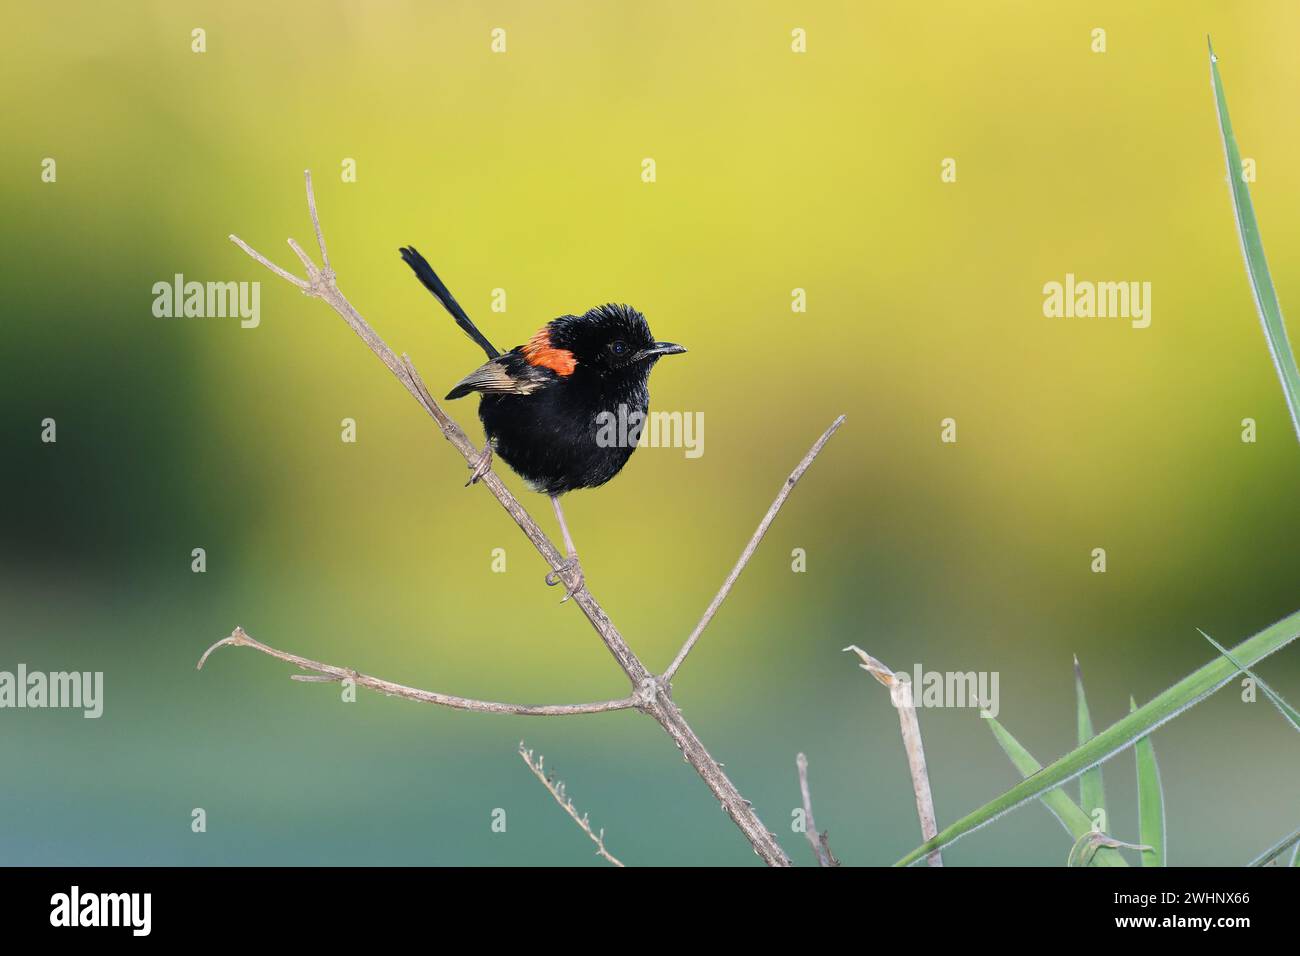 An Australian adult male Red-backed Fairy-wren -Malurus melanocephalus- bird perched on a thick, tall, dry grass stem looking for food Stock Photo